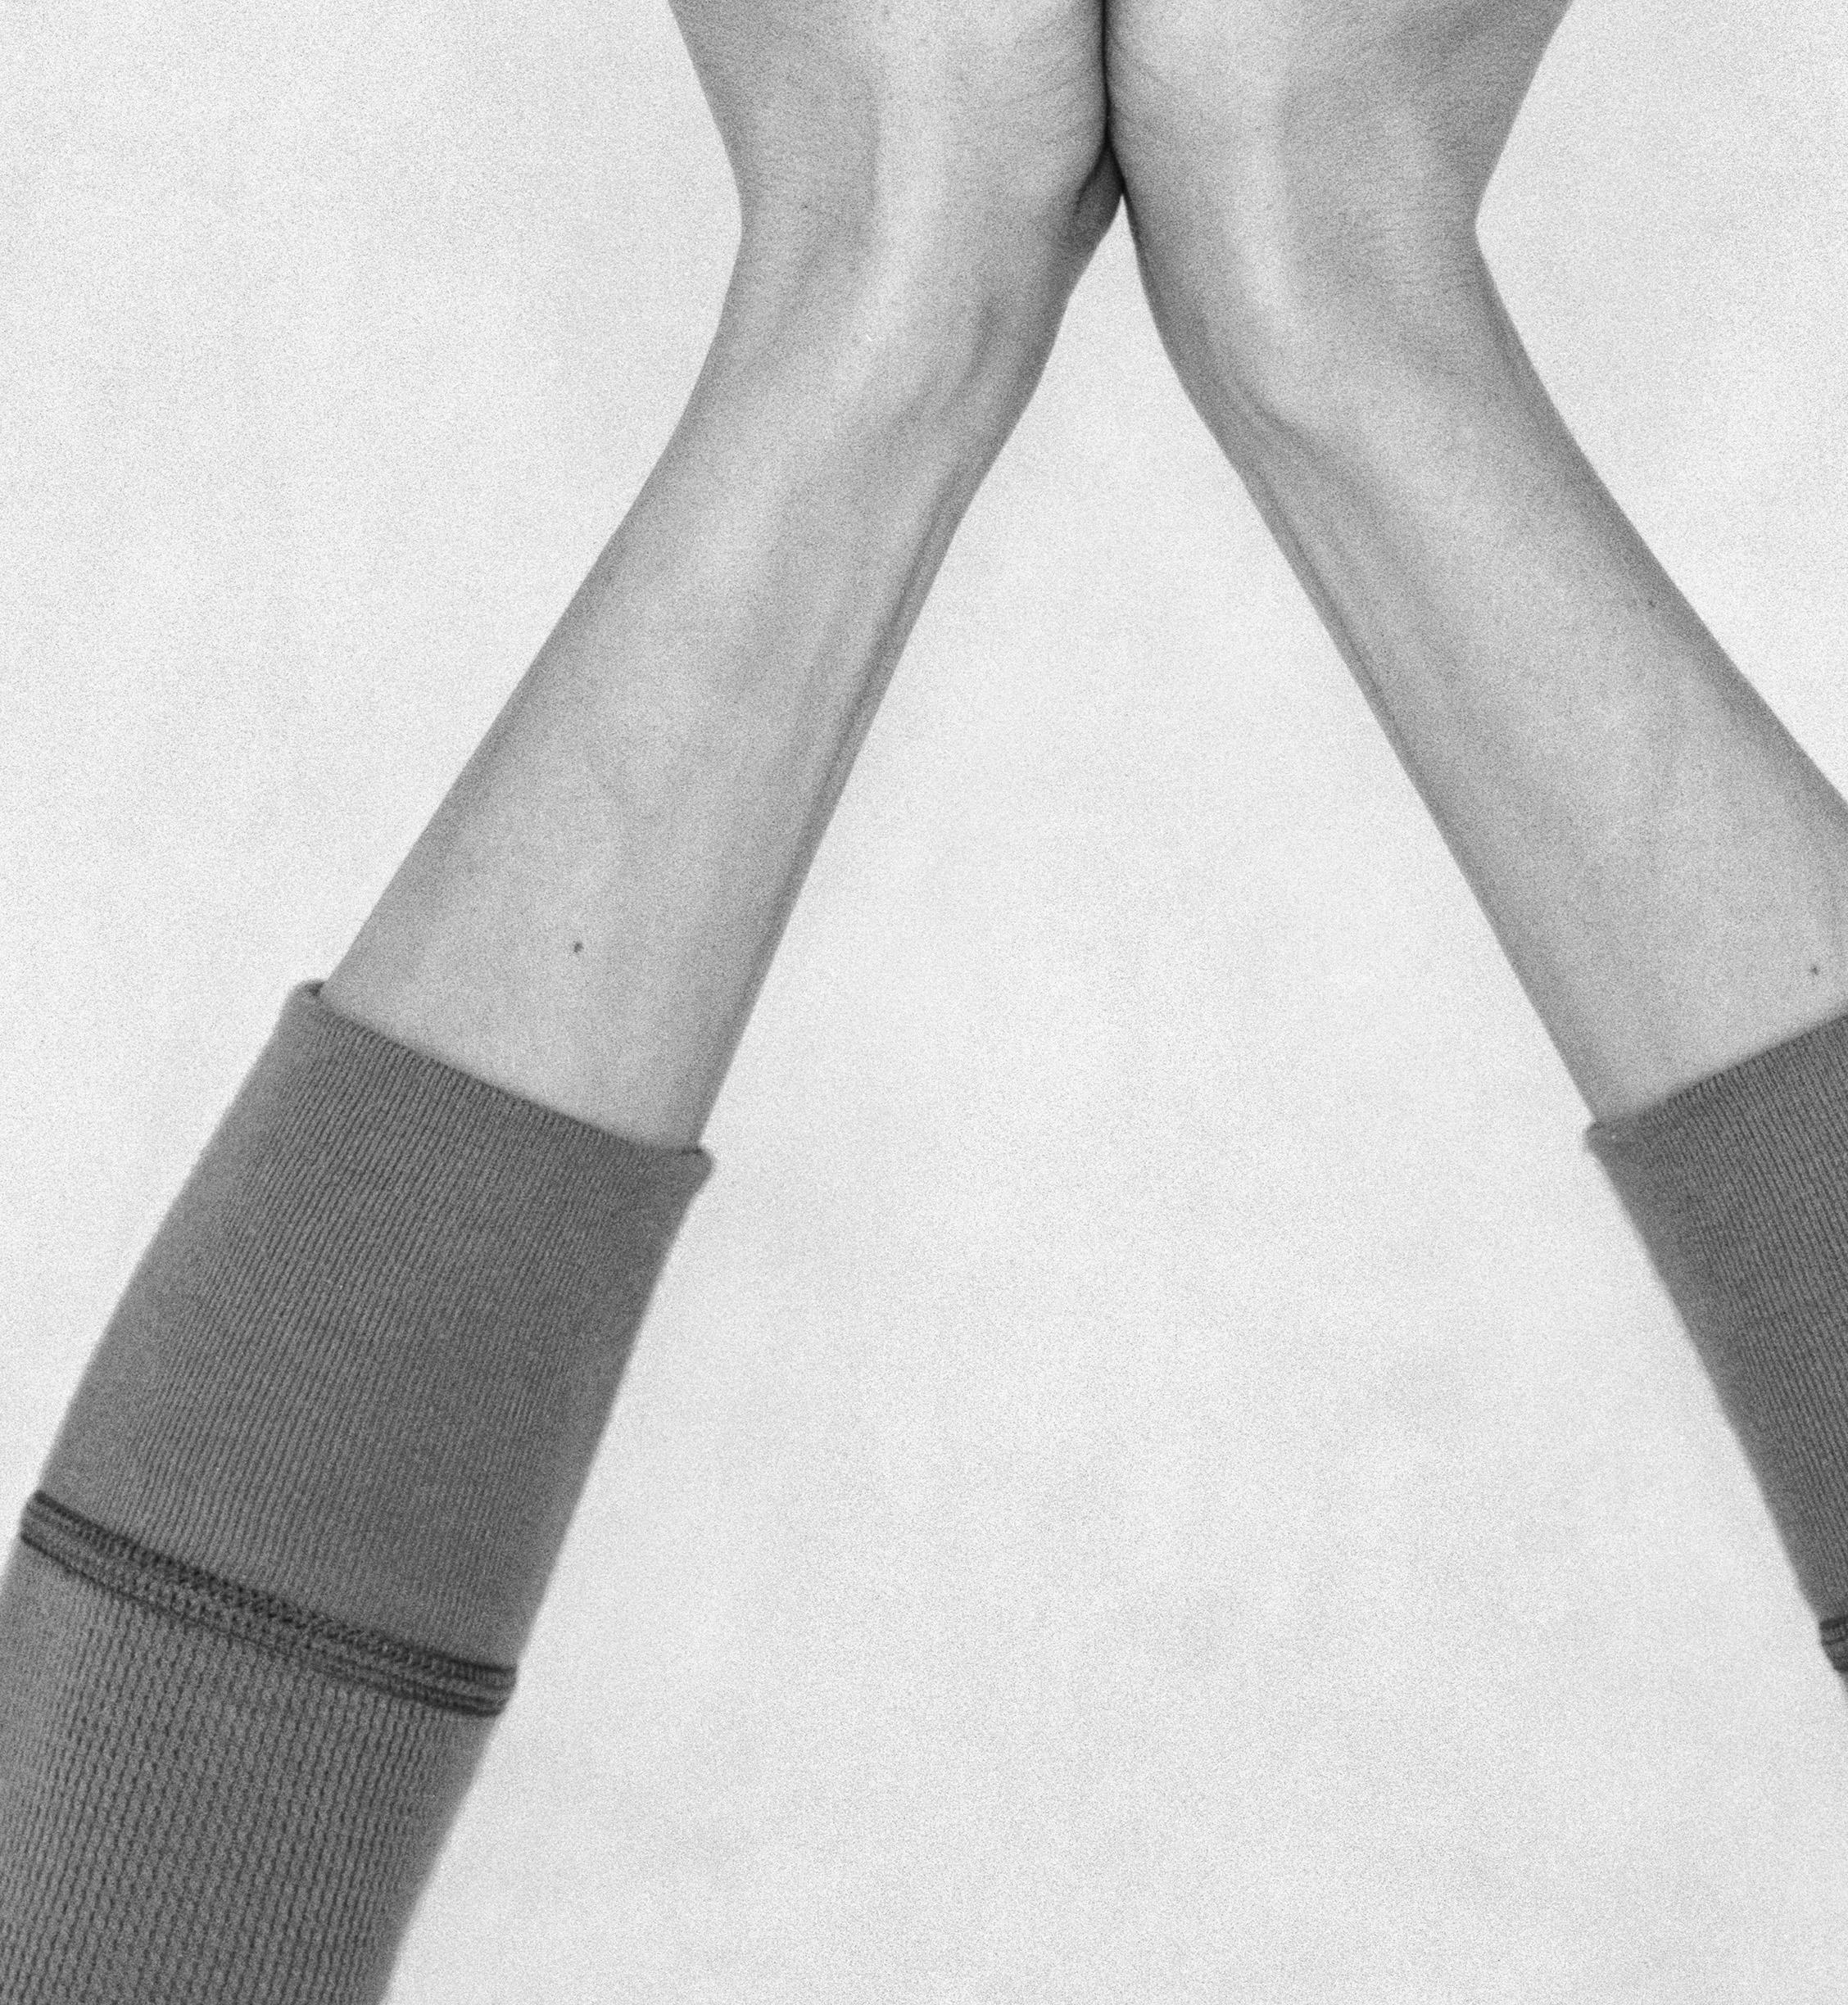 Untitled XVII. From the Series Chiromorphose. Hands. Black & White Photography For Sale 2